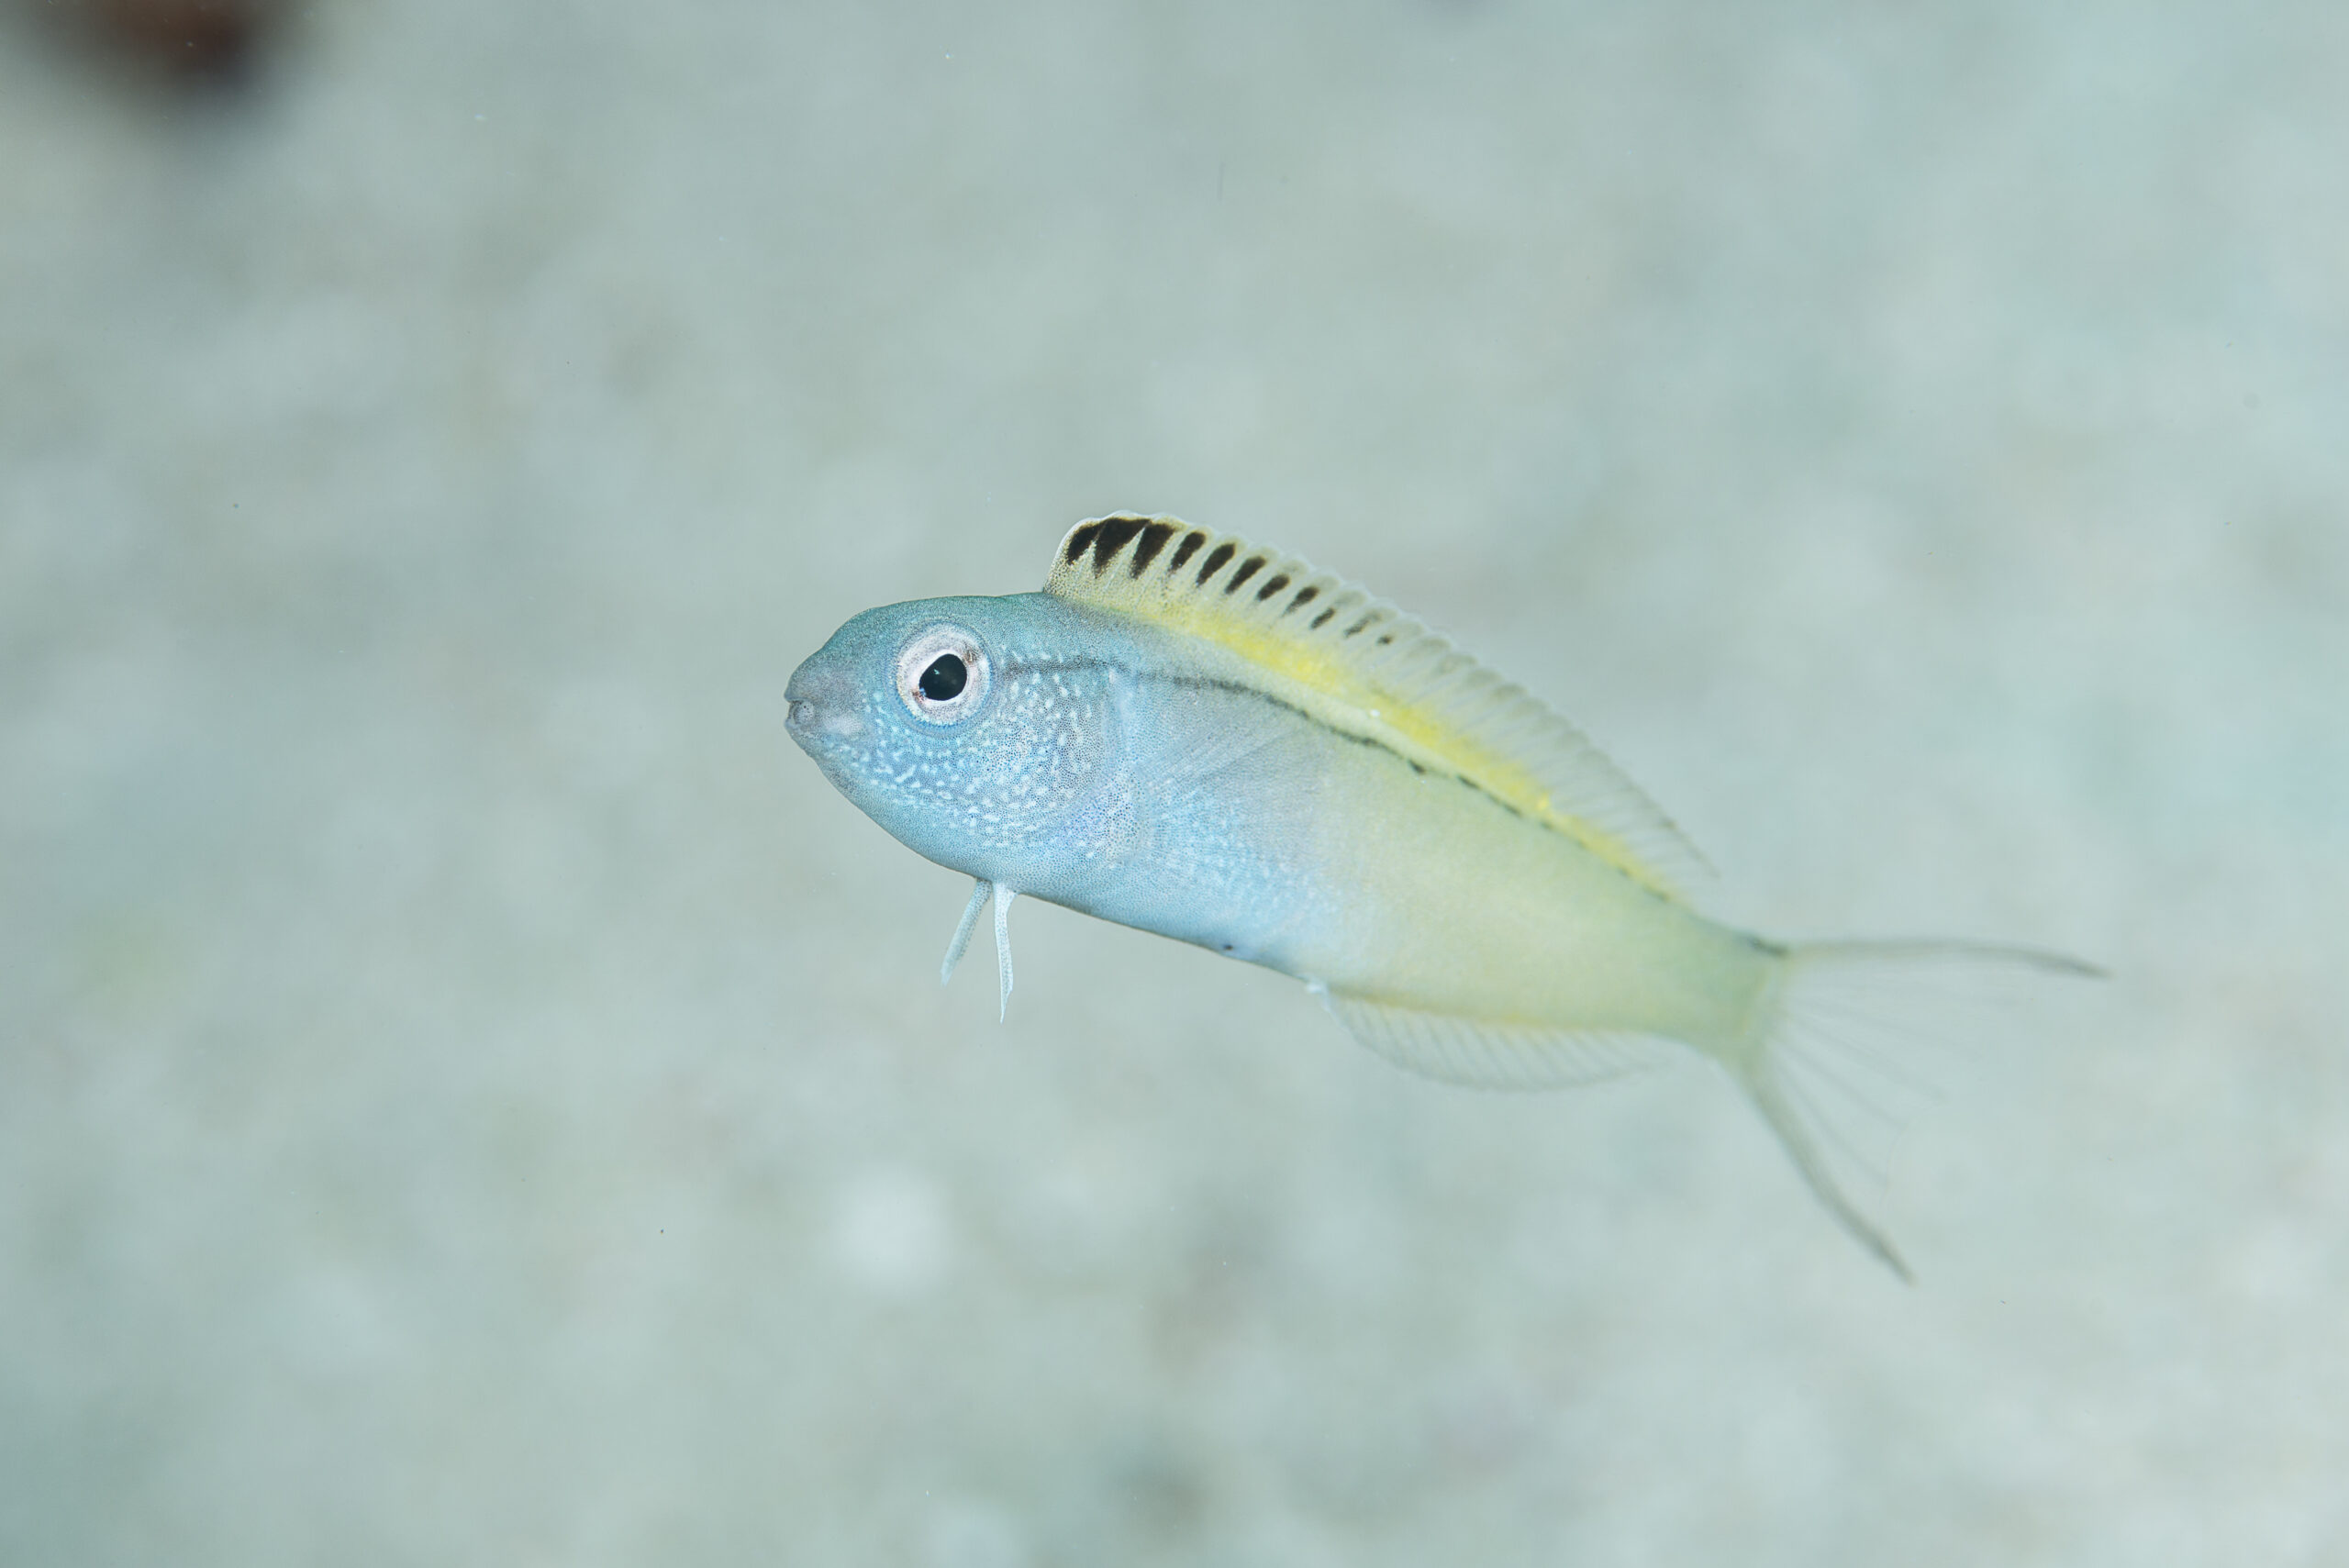 This fish basically gives its enemies heroin